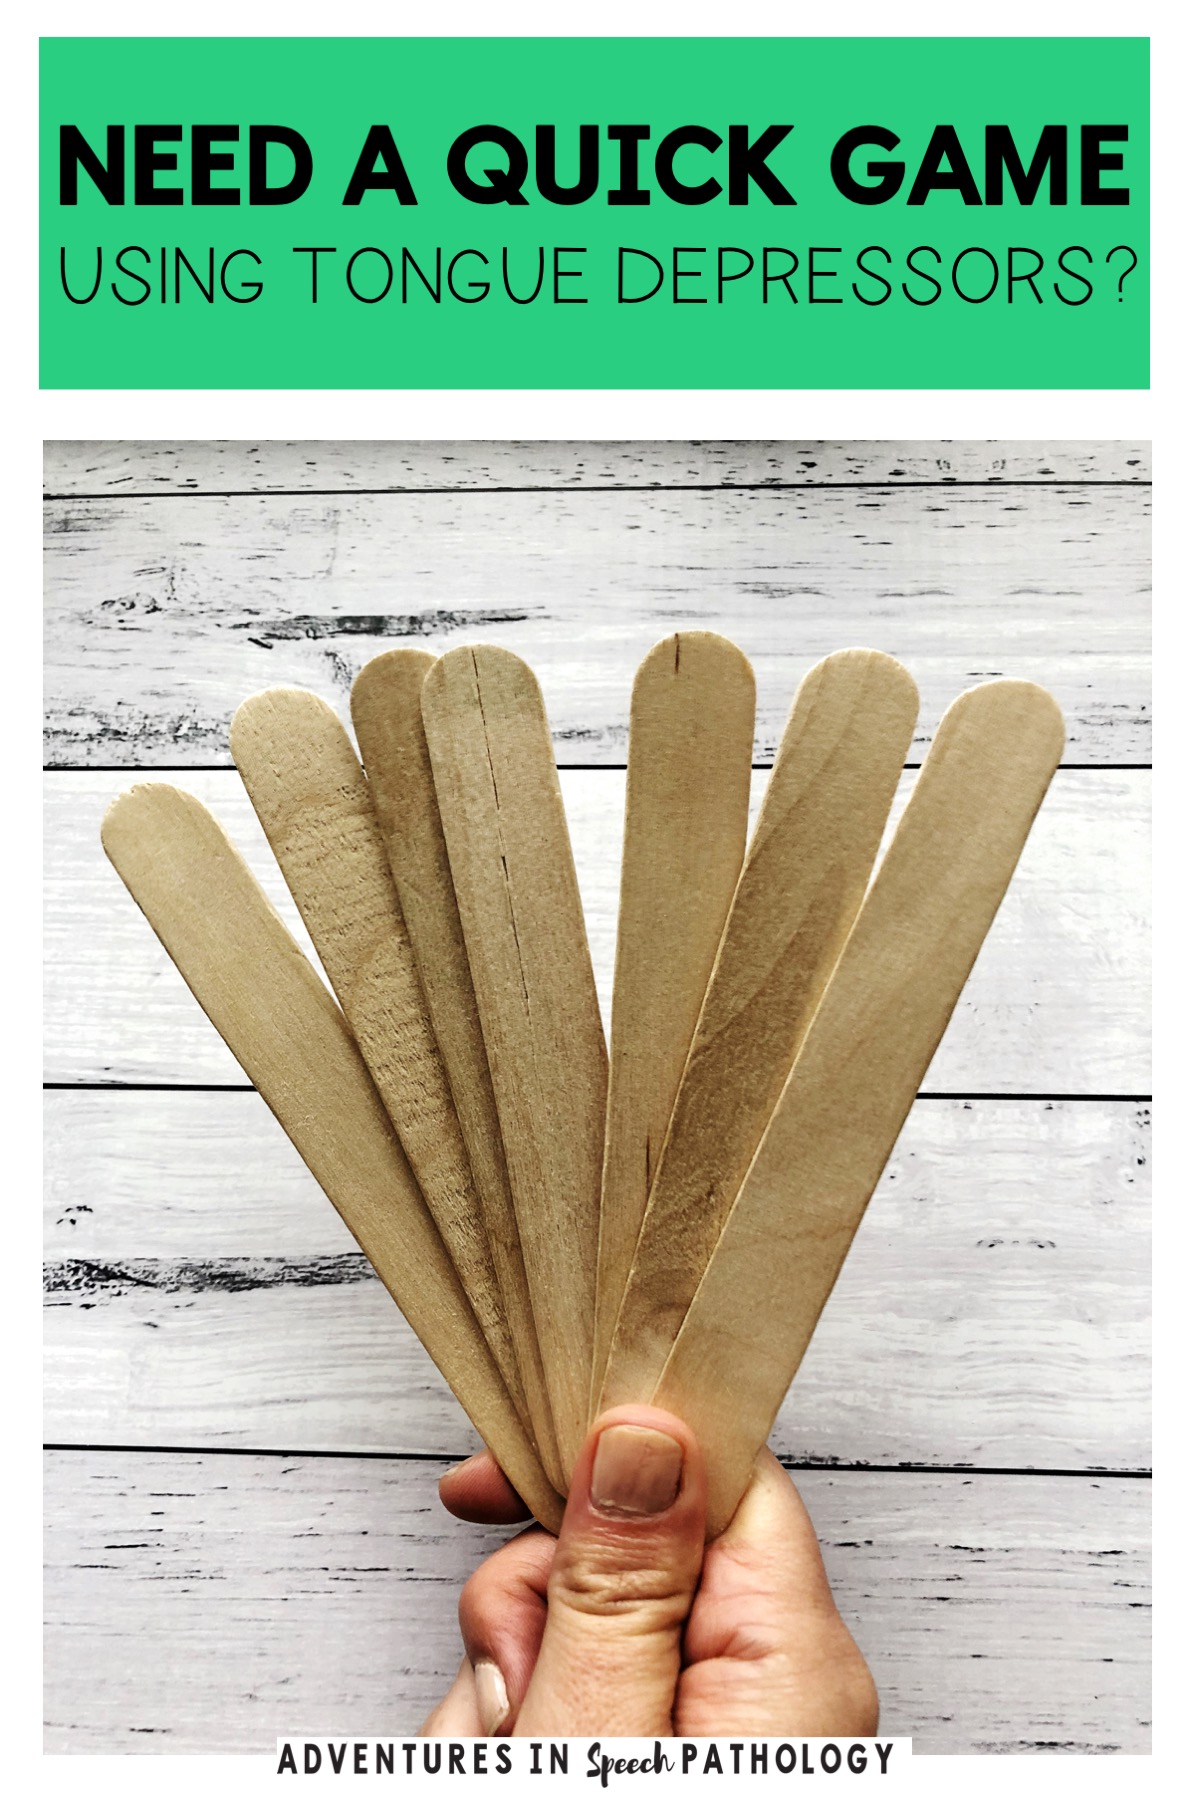 Need a Quick Game Using Tongue Depressors? - Adventures in Speech Pathology